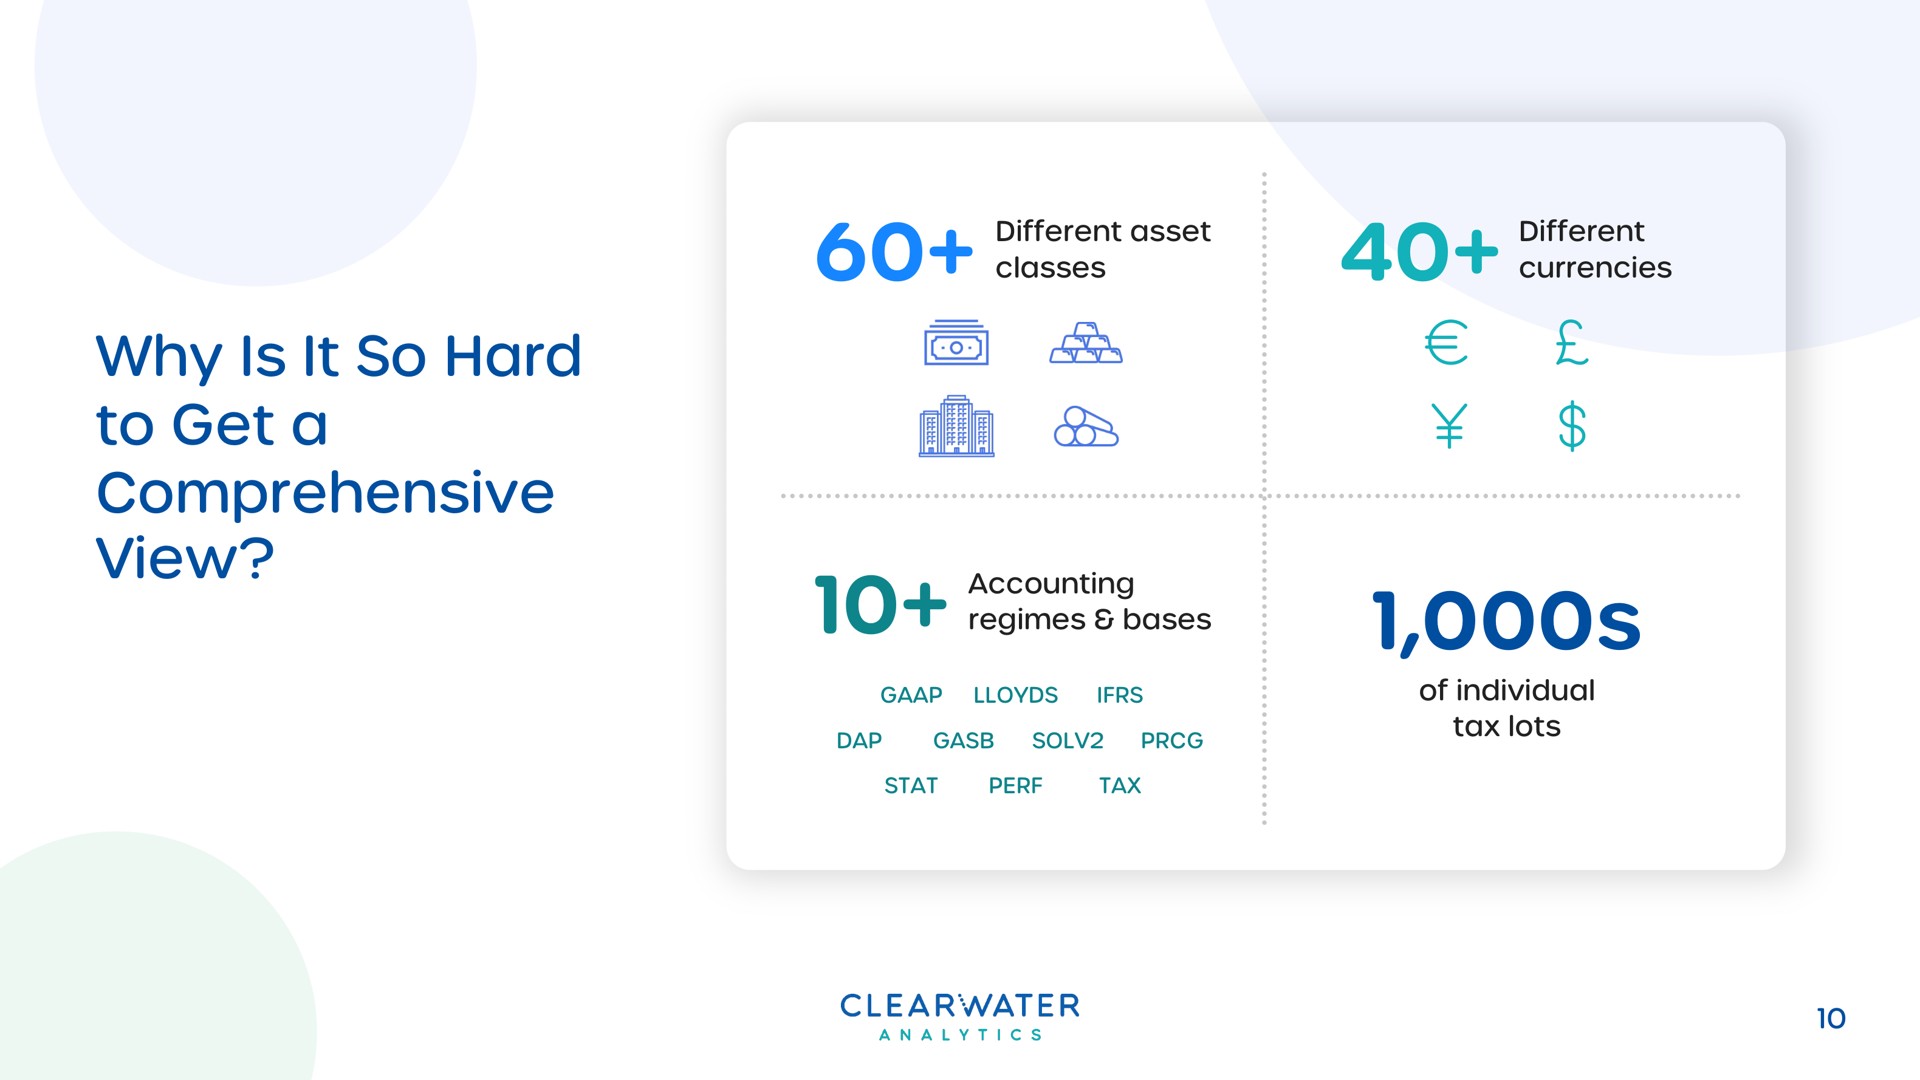 why is it so hard to get a comprehensive view geta | Clearwater Analytics